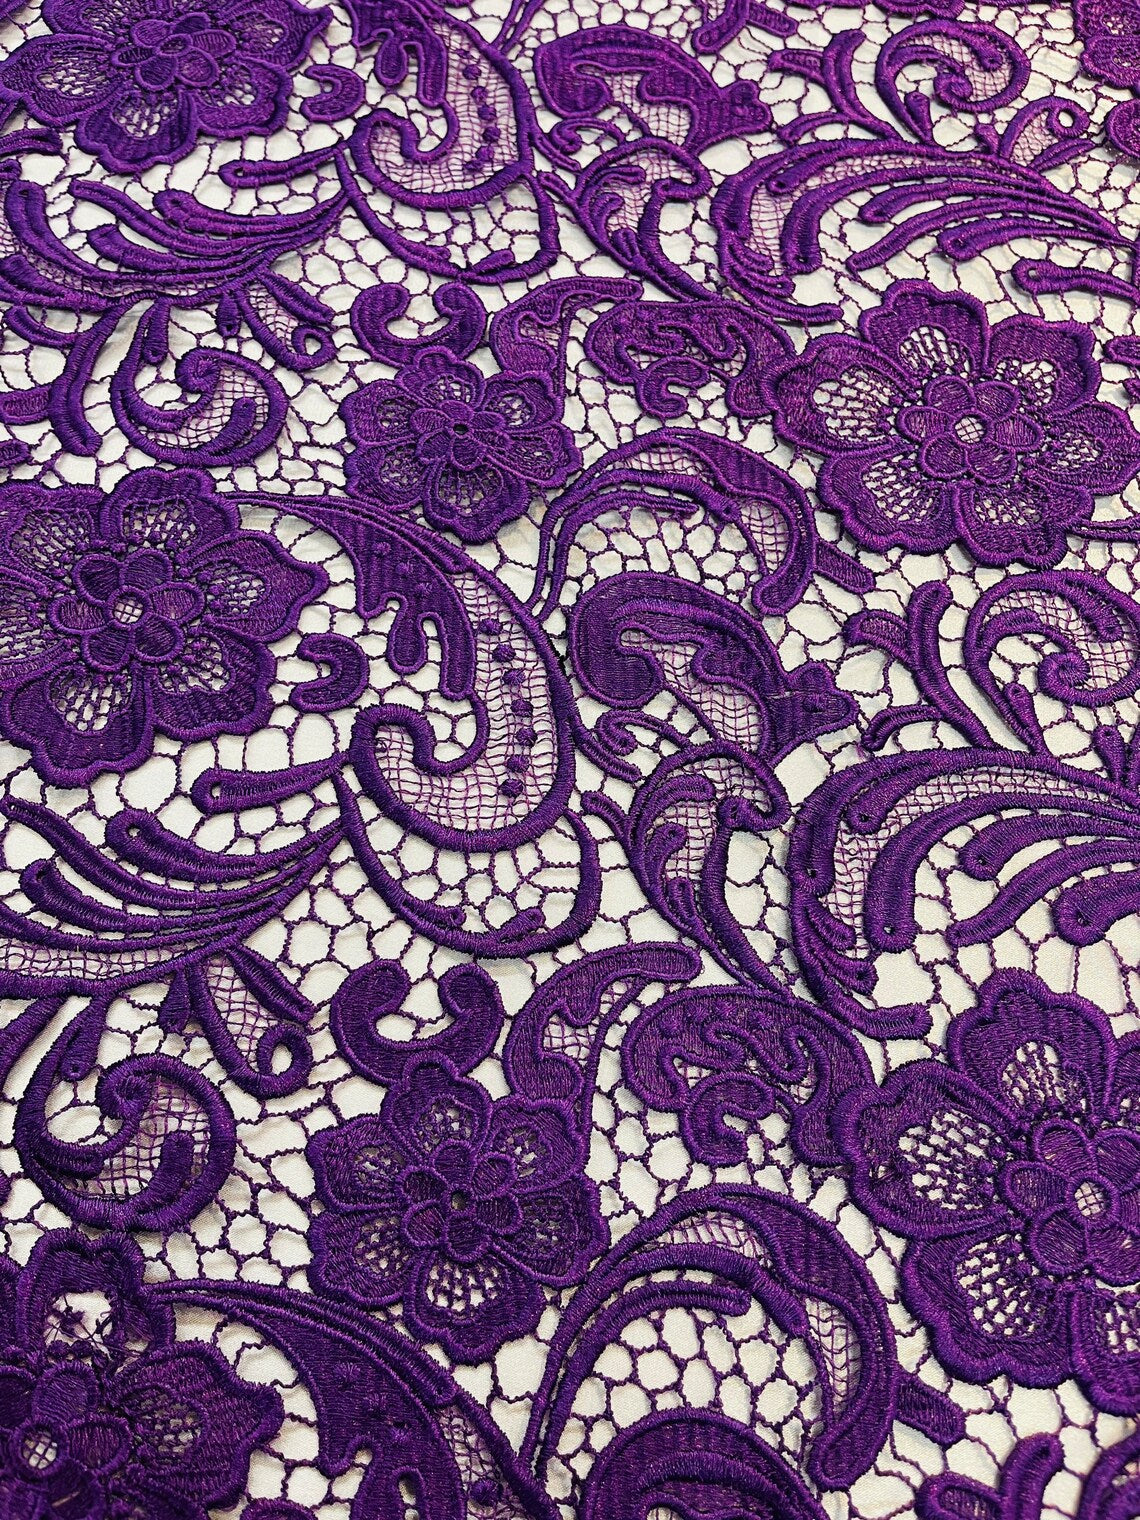 Violet lace fabric - Guipure lace - lace fabric from